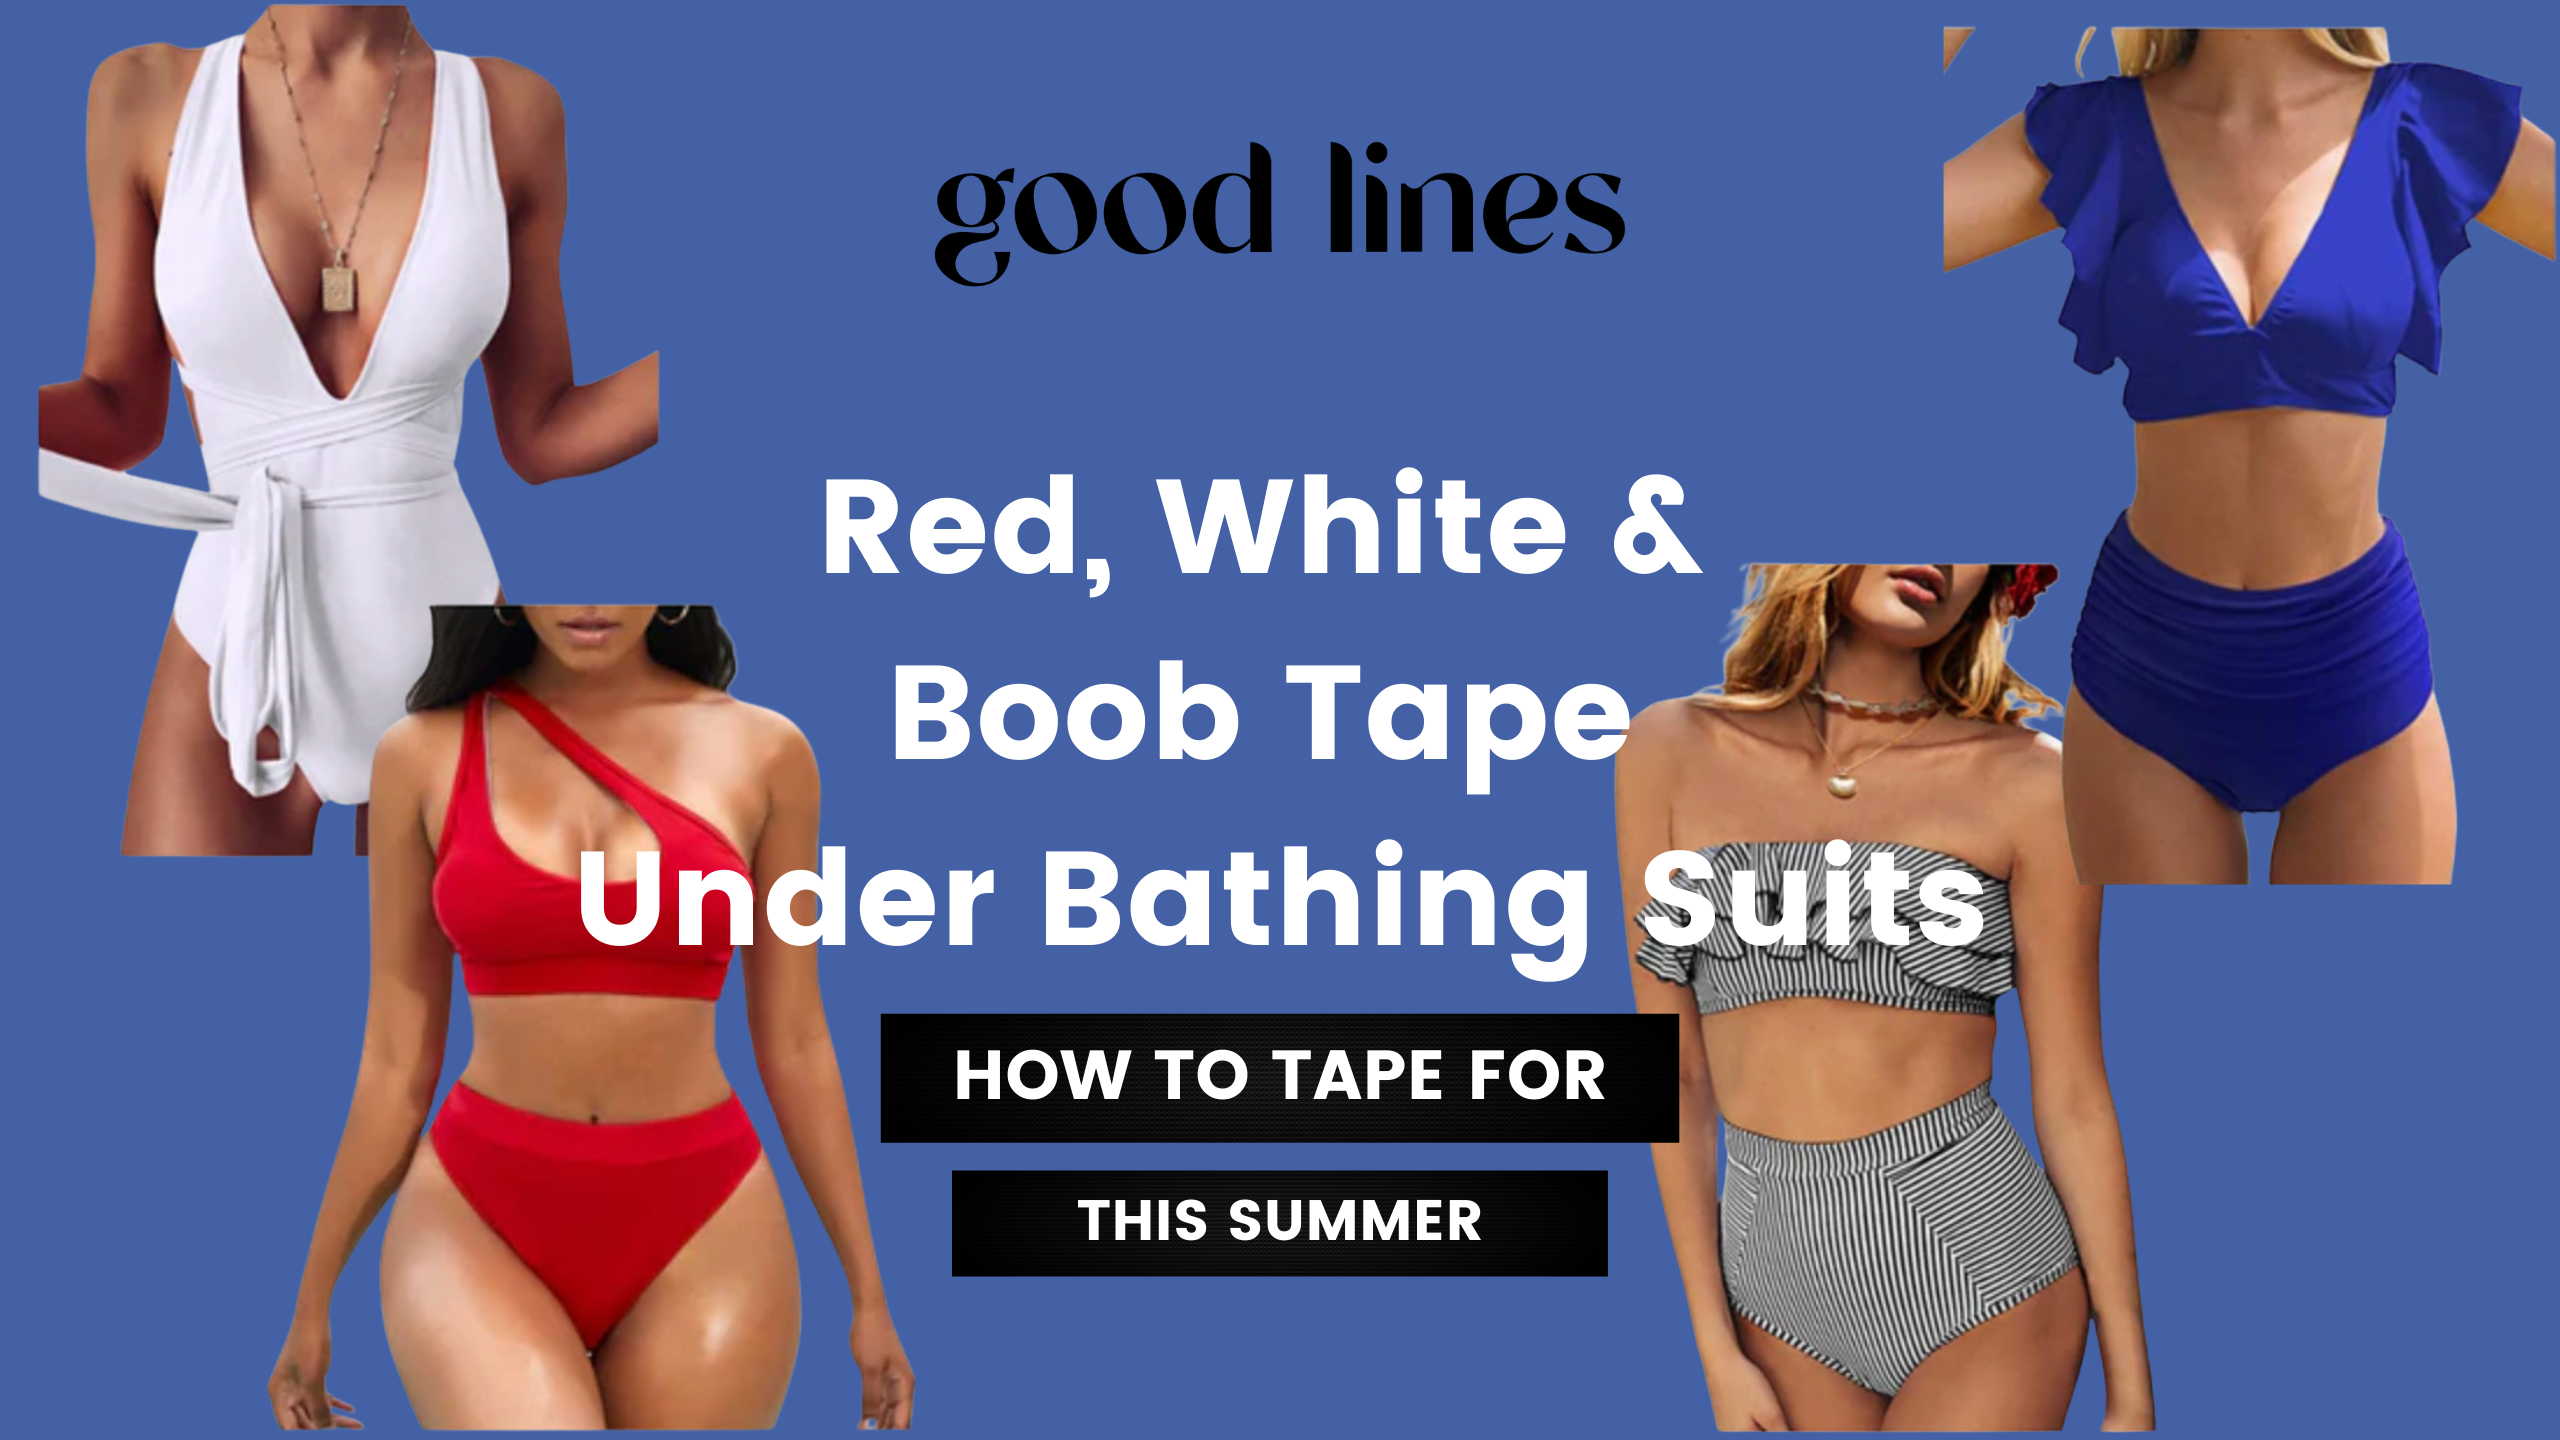 Red, White & Boob Tape Under Bathing Suits – Good Lines